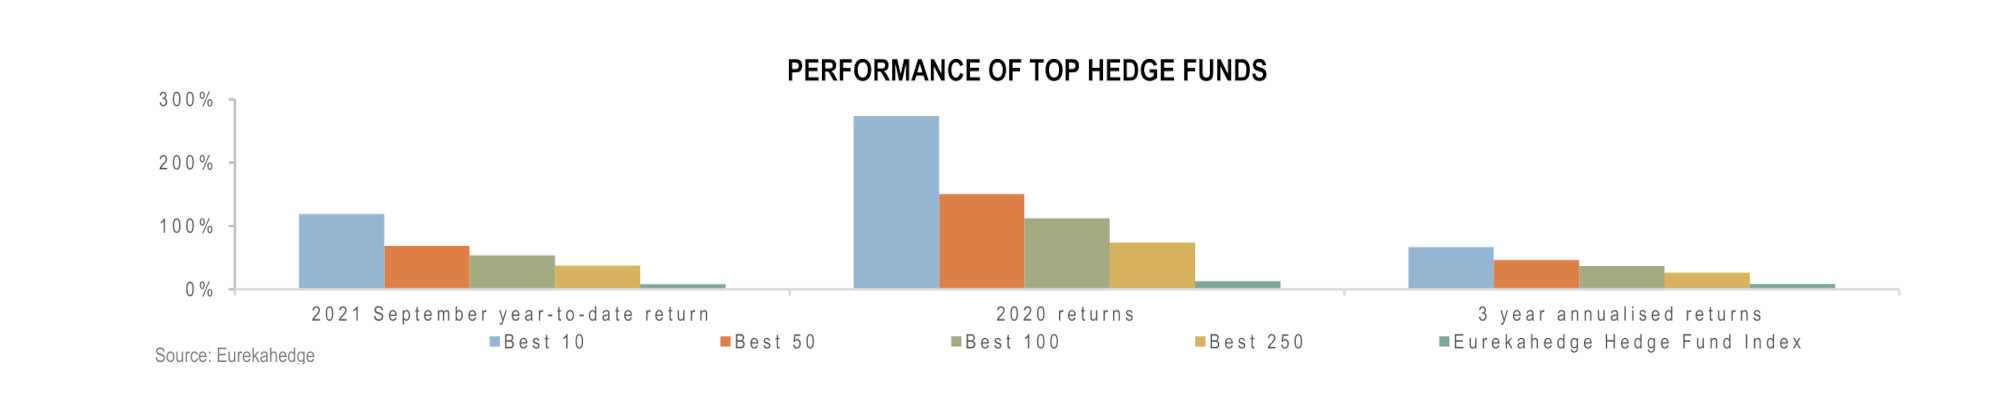 Global Hedge Funds Infographic Nov 2021 - Fund Performance